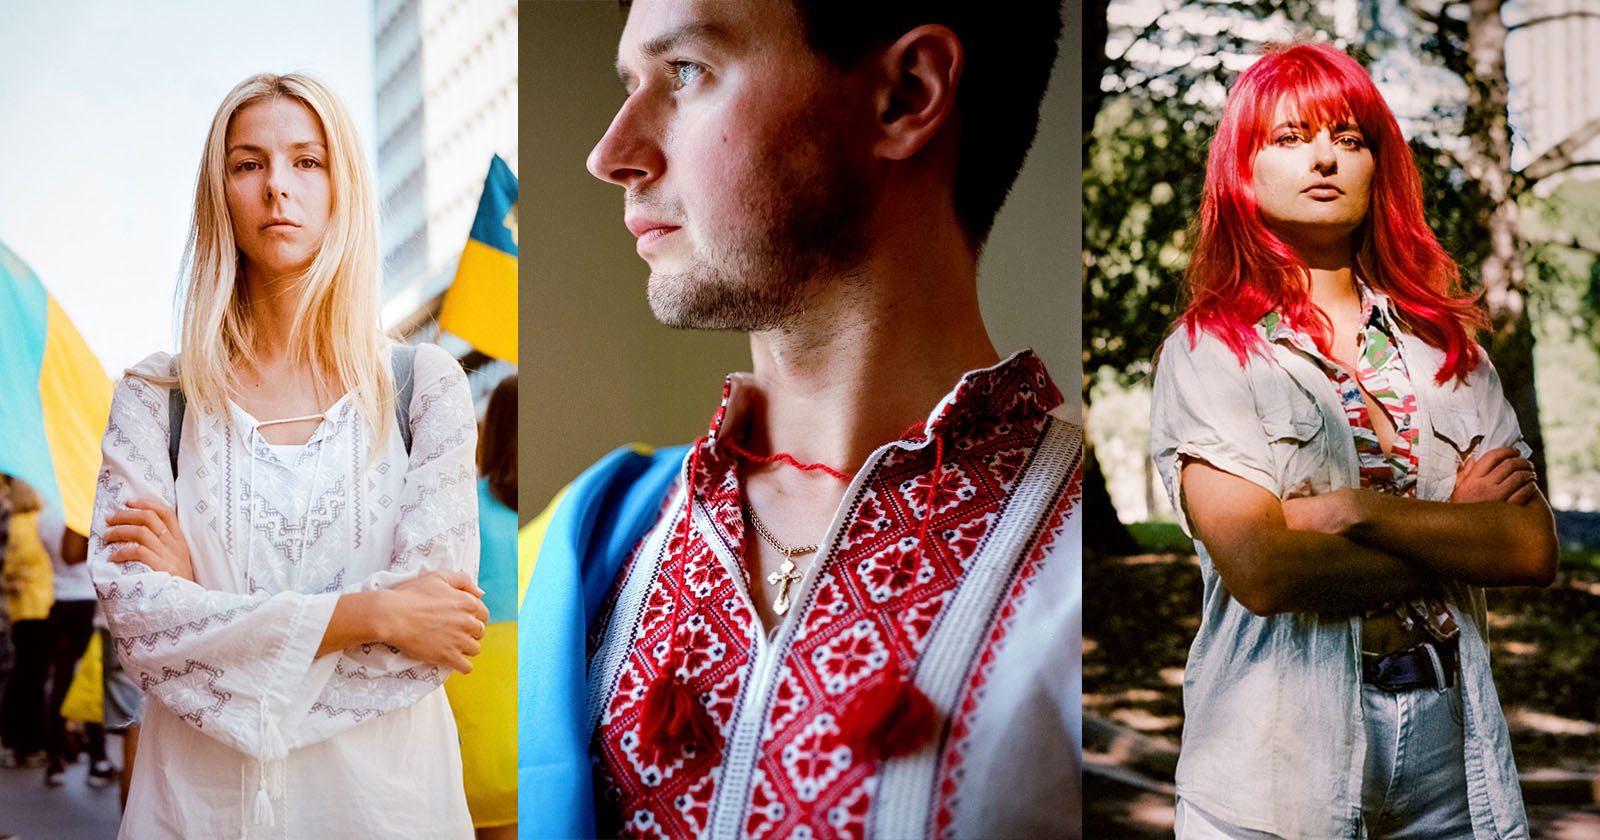 A Photojournalists Intimate View of Ukrainians Living in Sydney